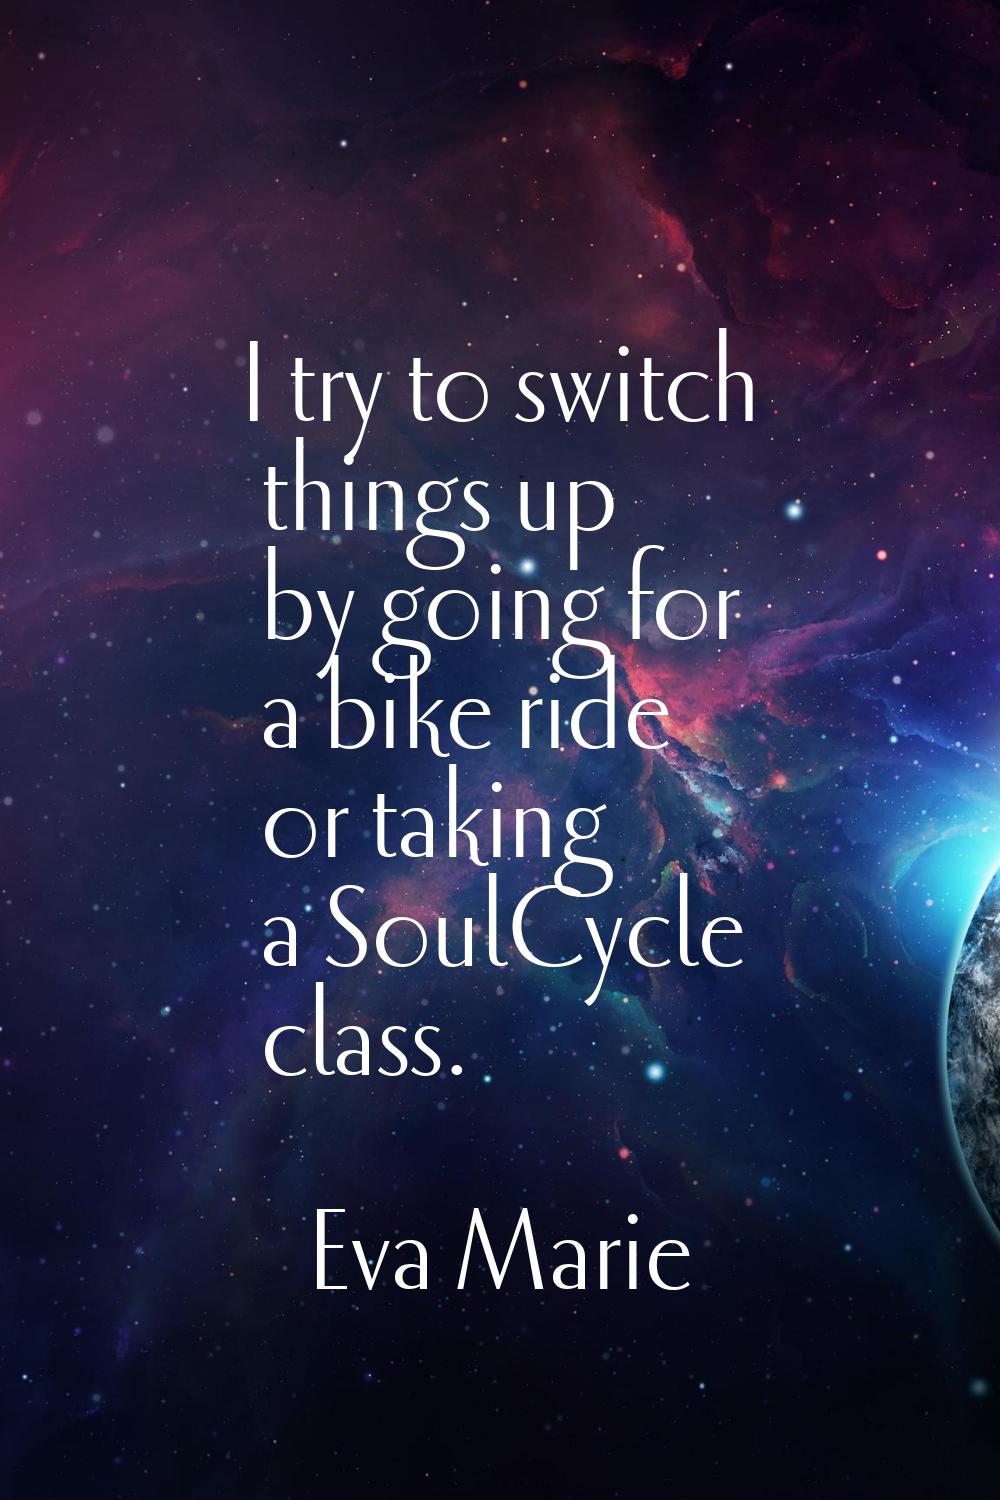 I try to switch things up by going for a bike ride or taking a SoulCycle class.